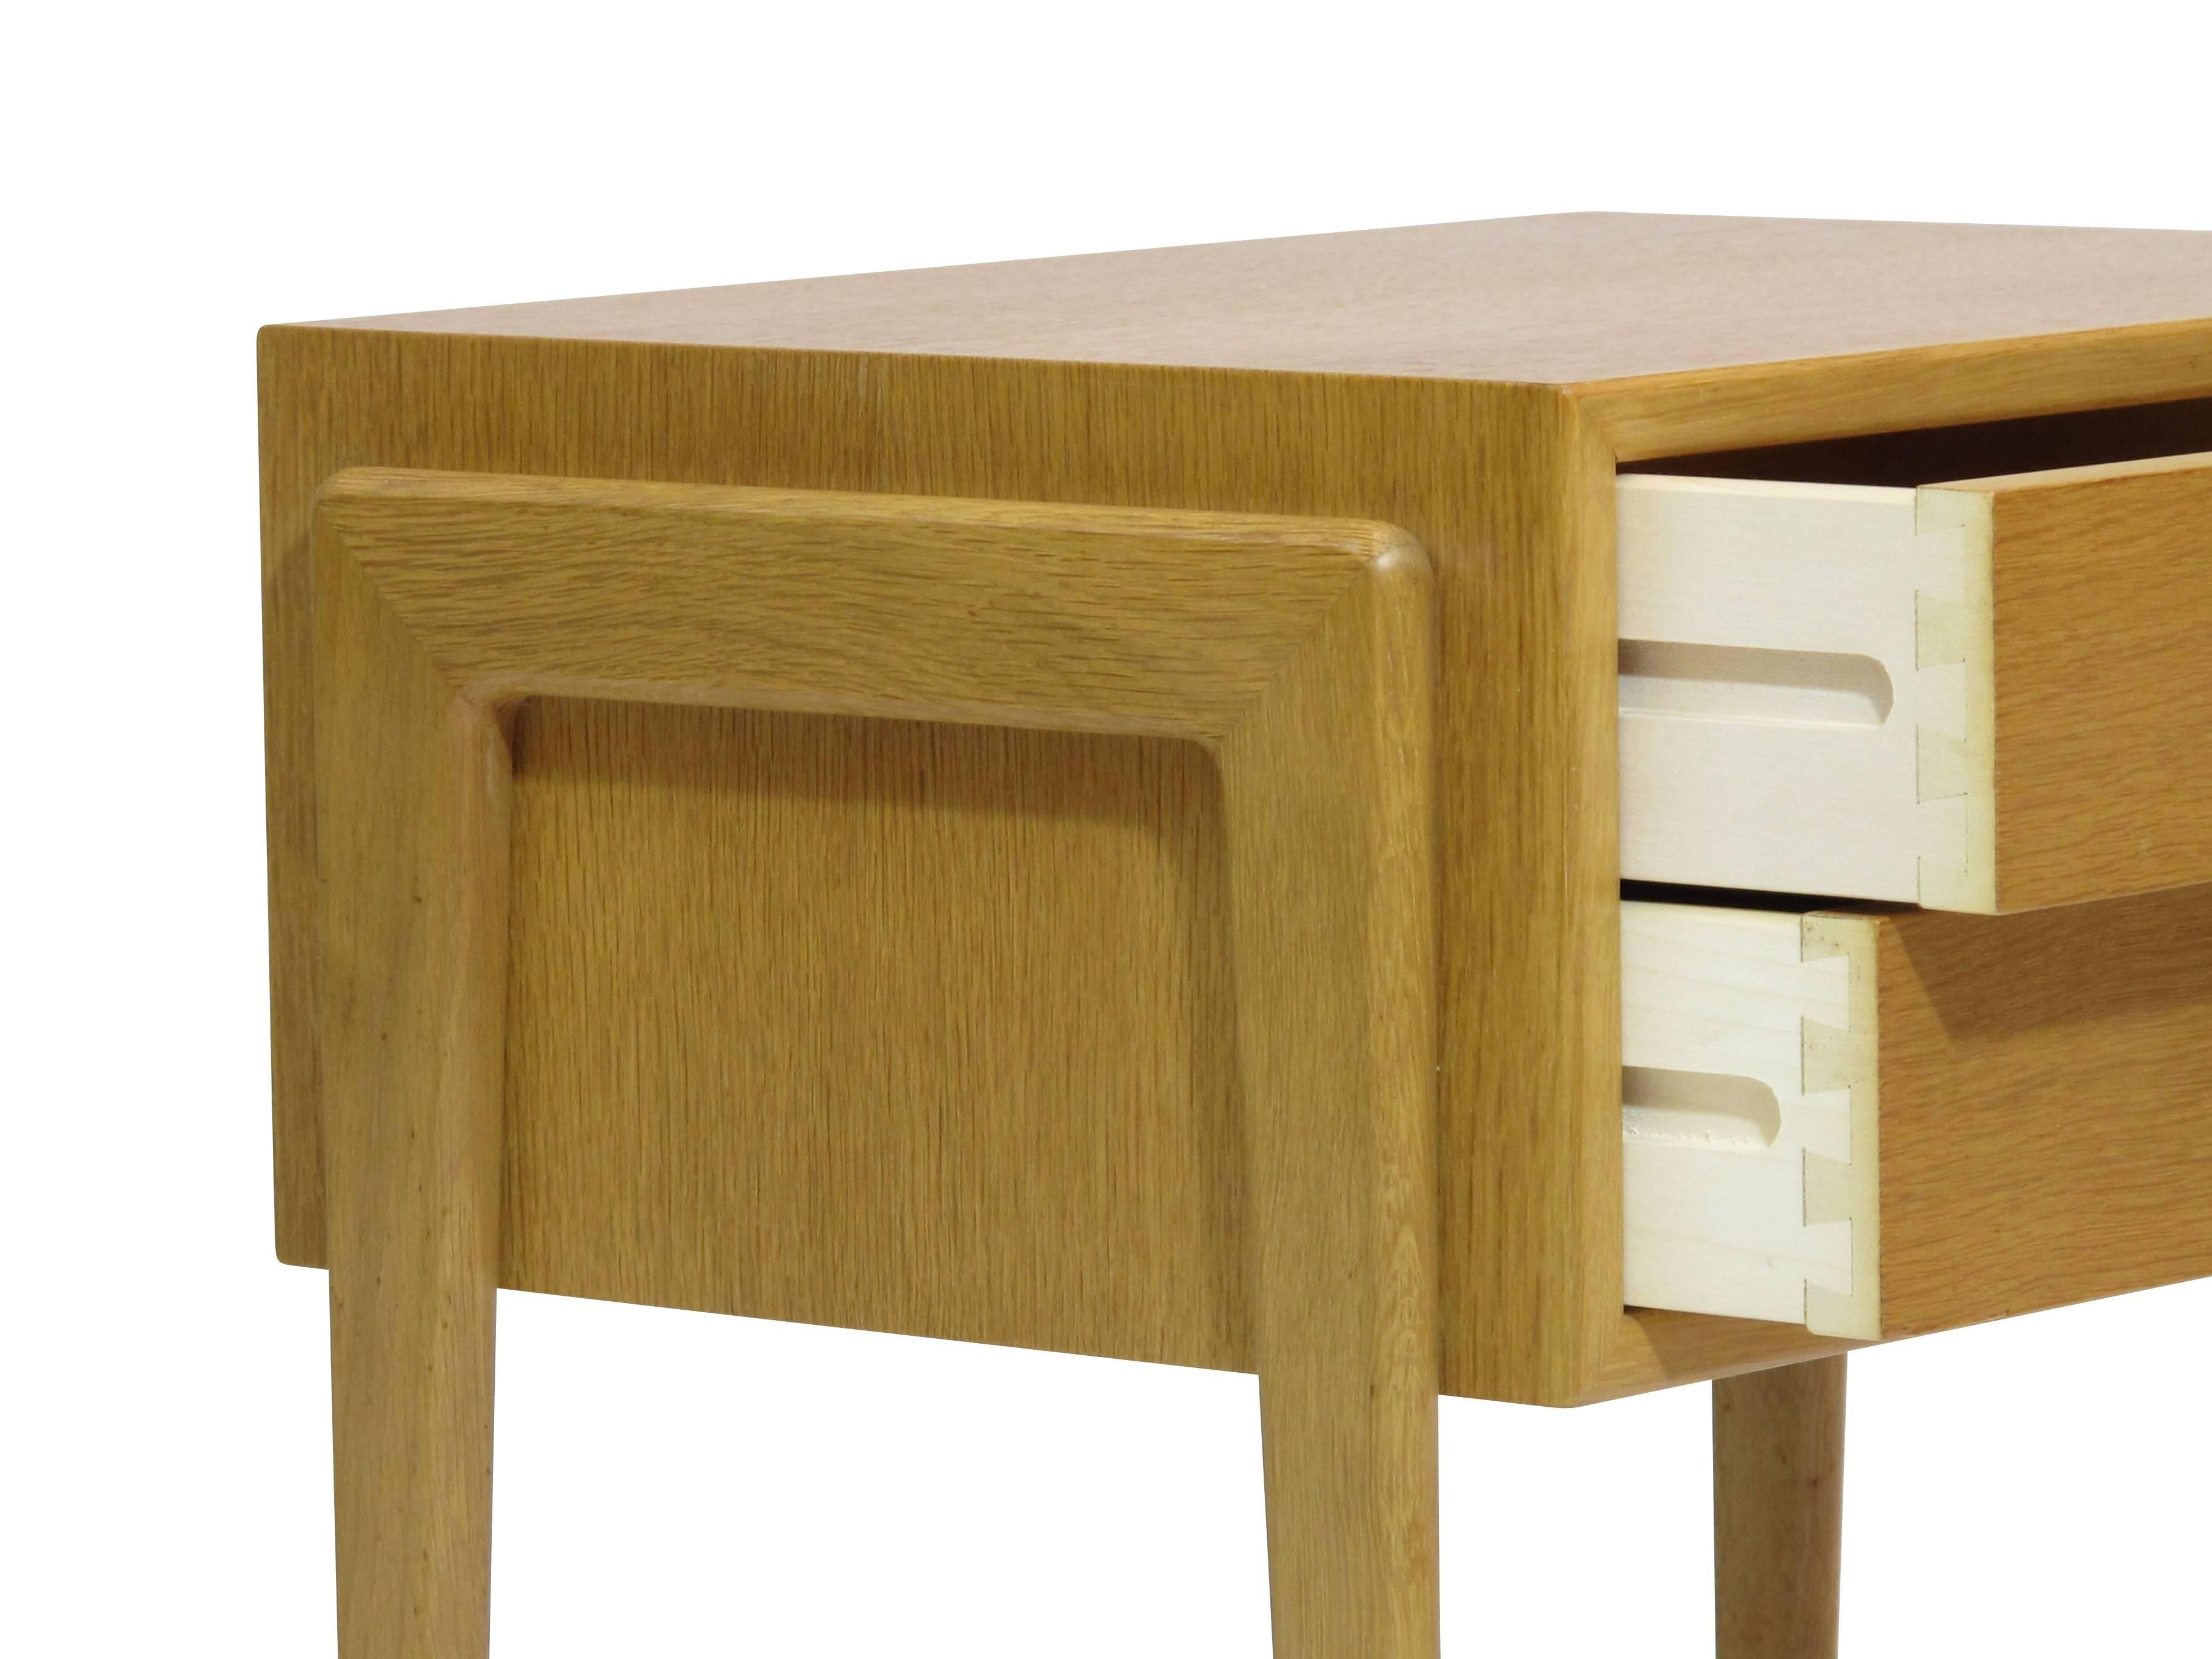 Midcentury nightstands crafted of white oak veneer over solid wood core, each with two drawers raised on solid oak legs. Original finish in excellent condition.